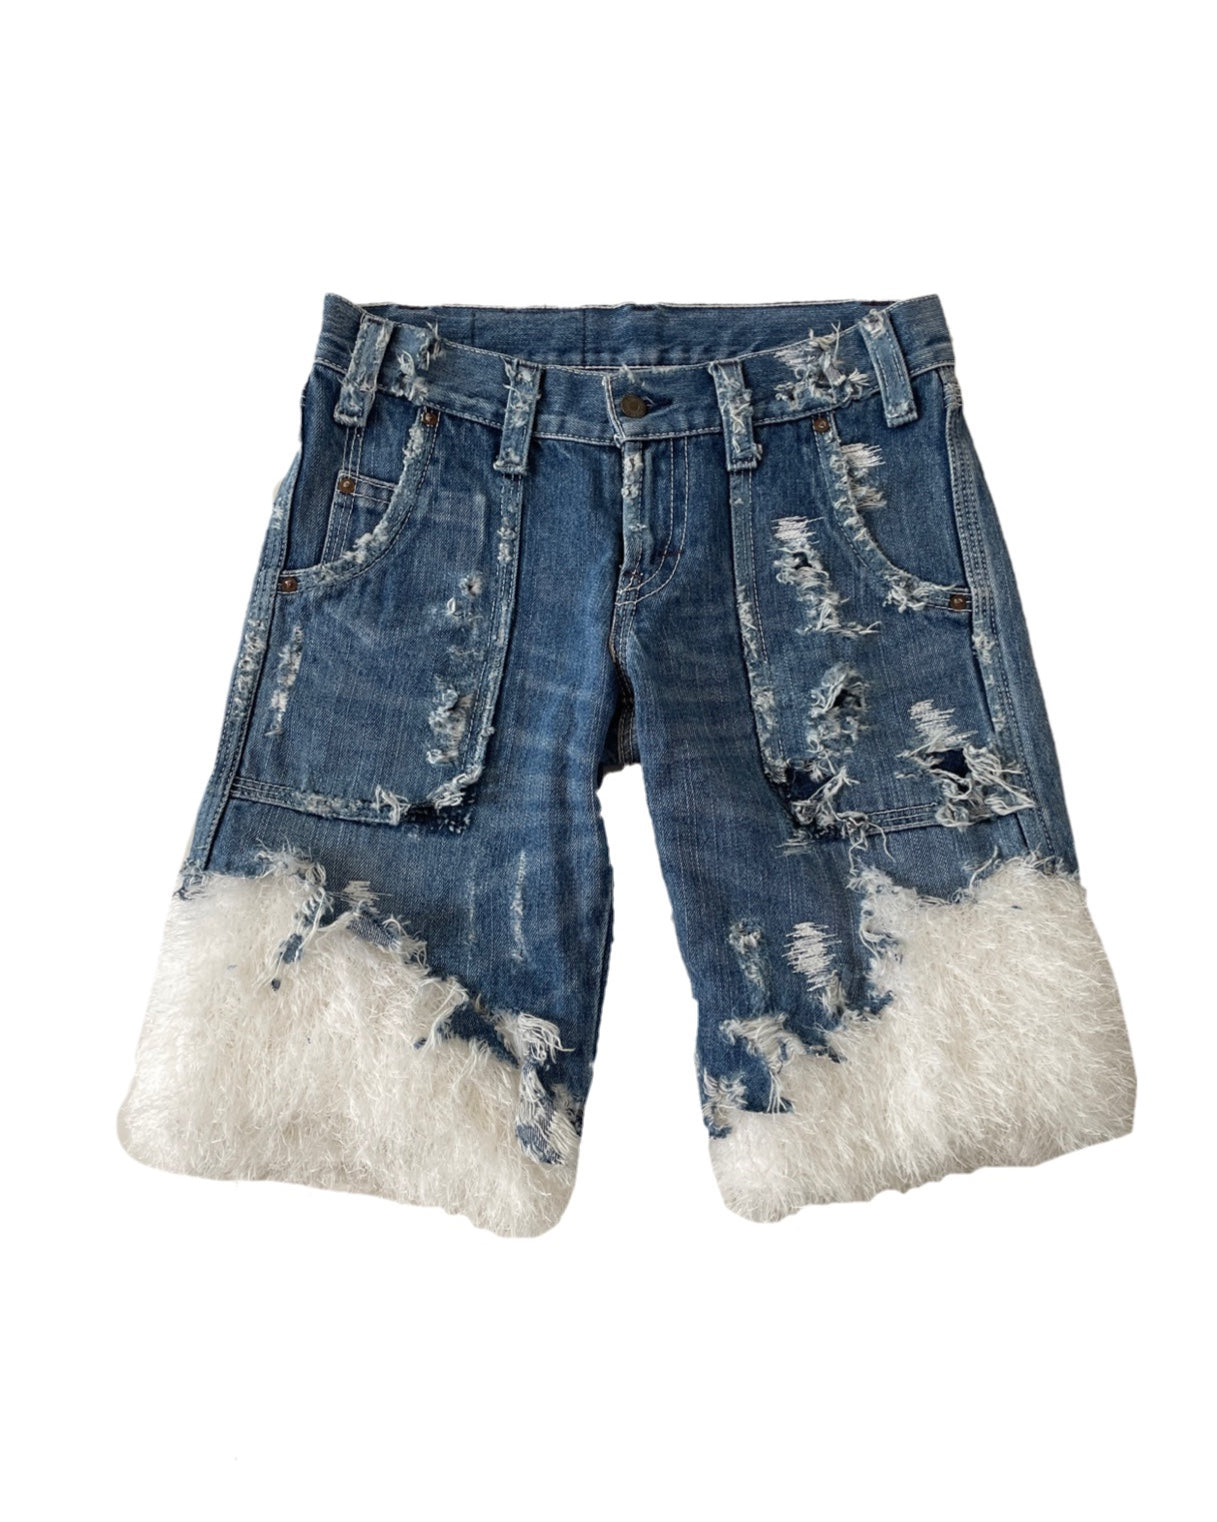 Distressed Levis with Spring Fur 【01】